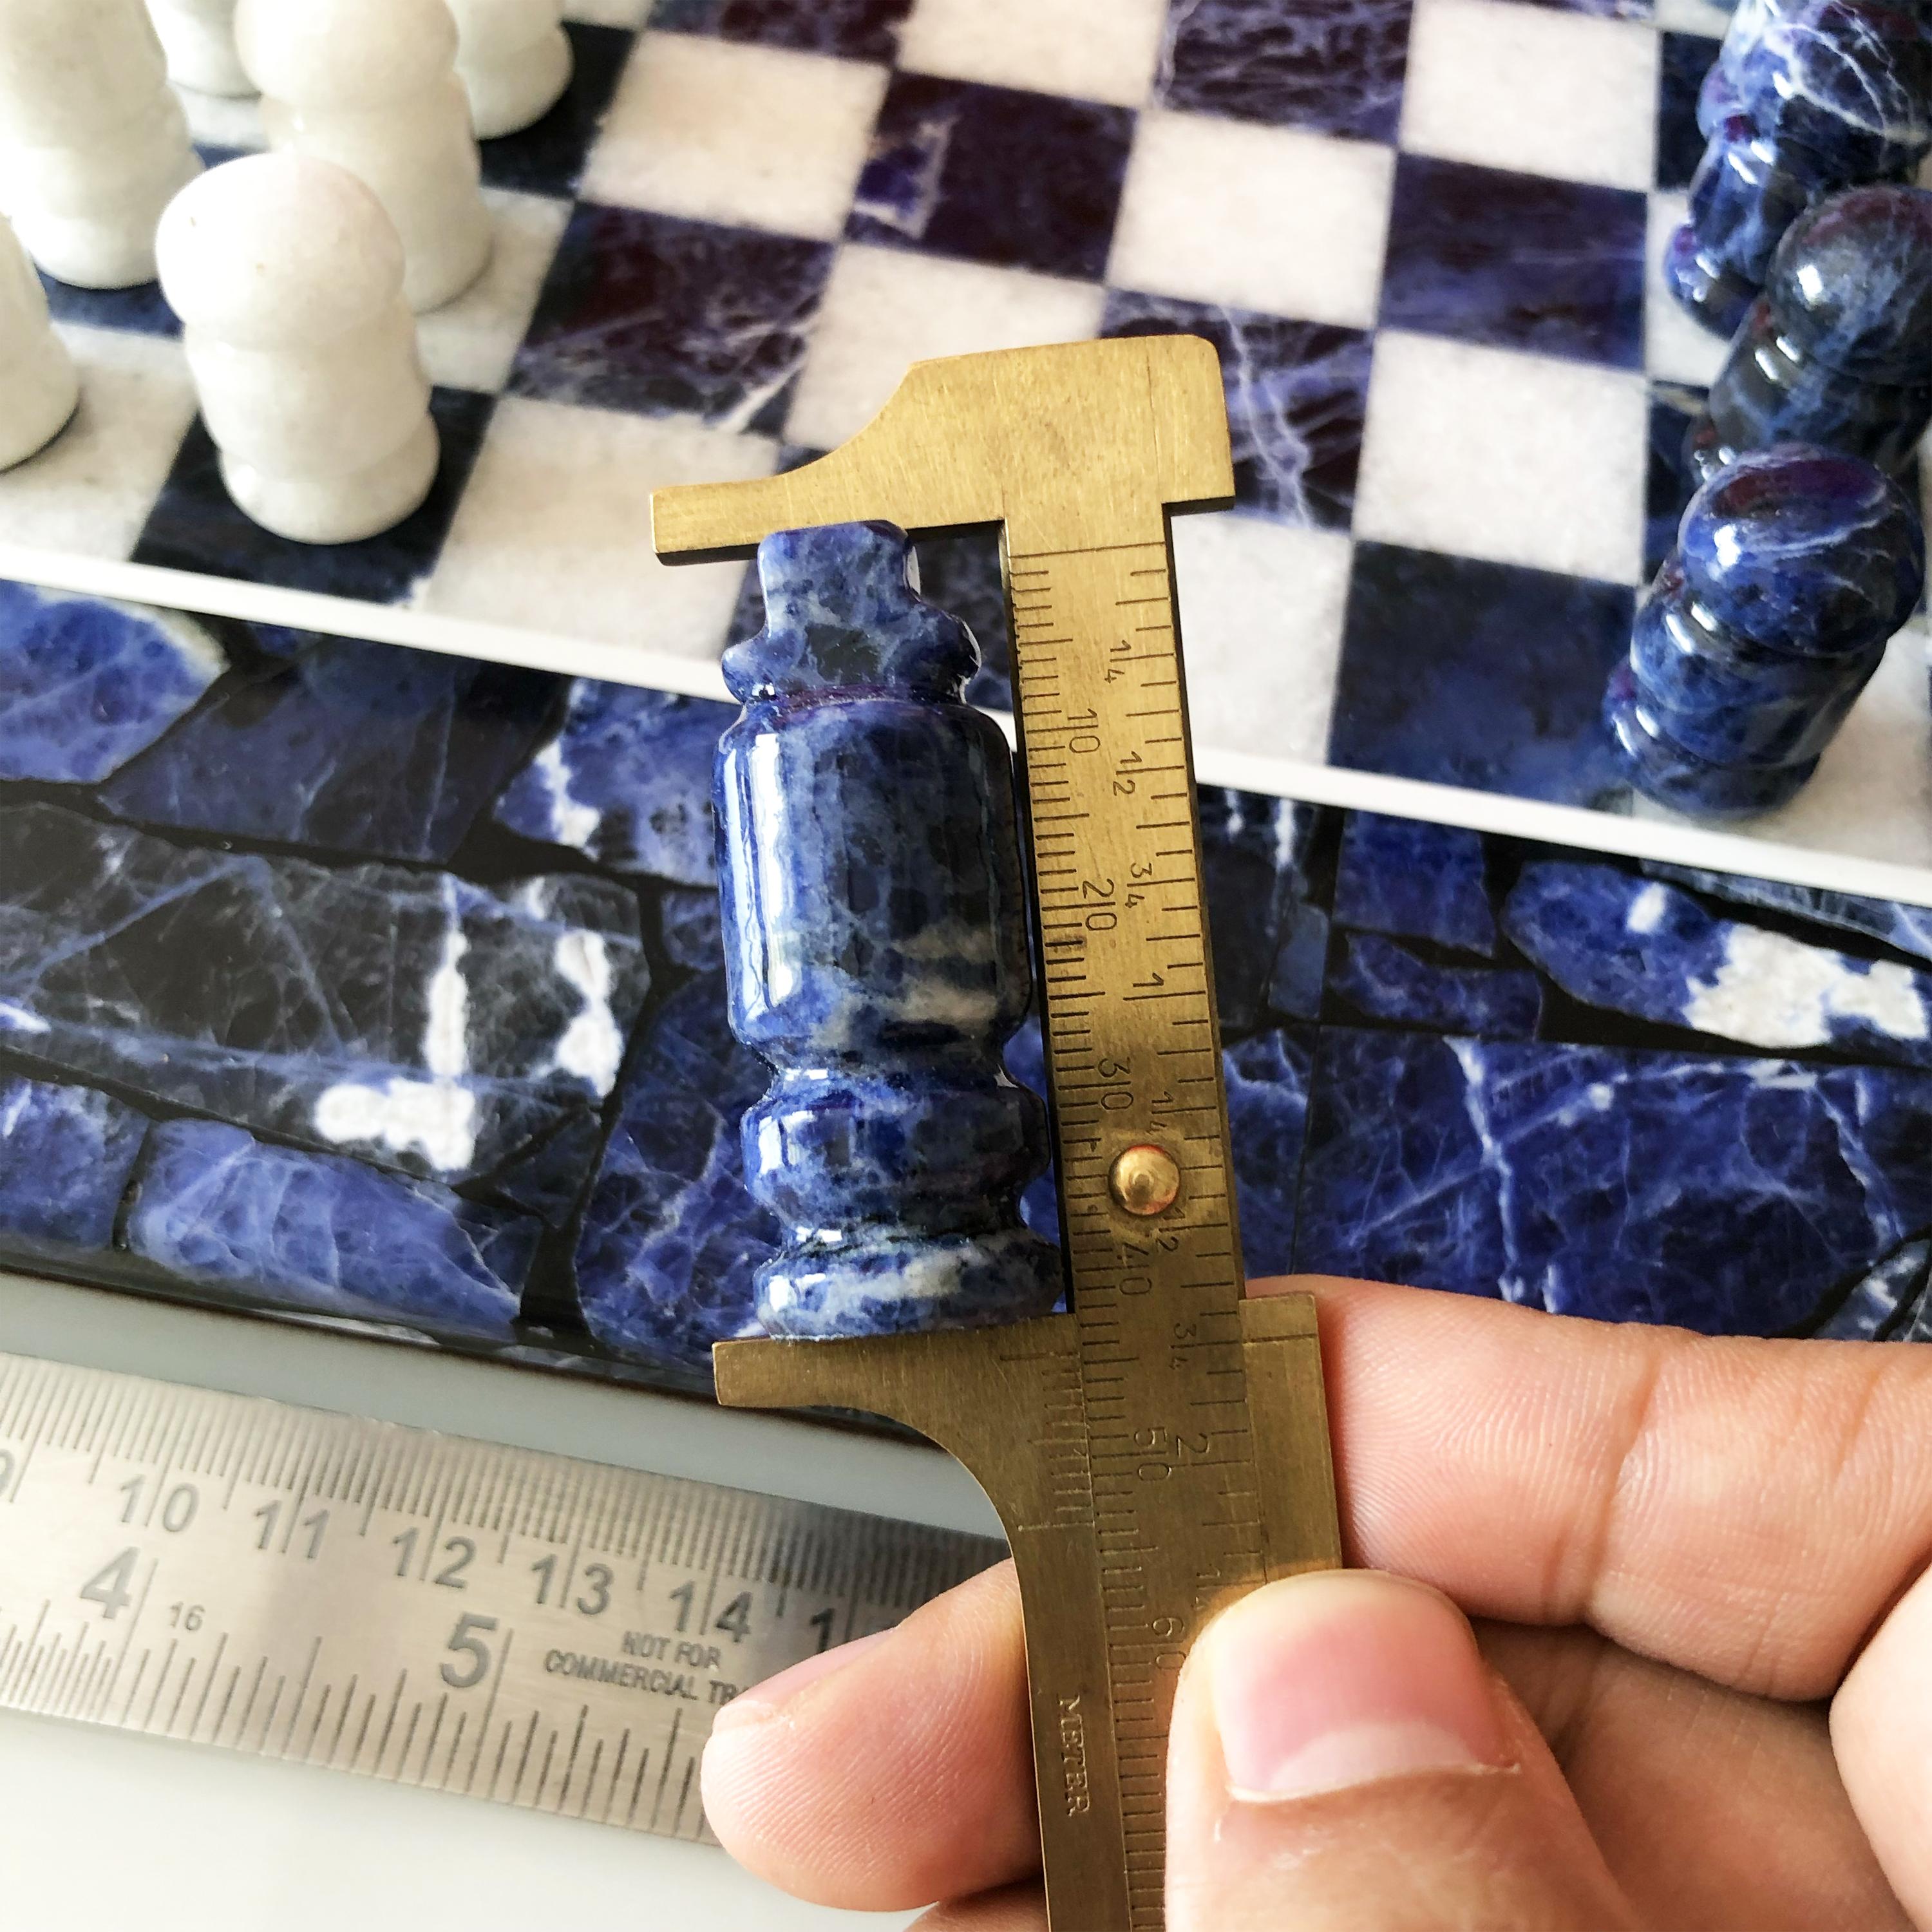 Beautiful luxurious Chess Board made of sodalite and marble. The set consists of 32 chess pieces and 1 chess board. The chess pieces are made in 2 sets - one in sodalite and other in marble. Each set of chess pieces consists of 16 pieces - eight